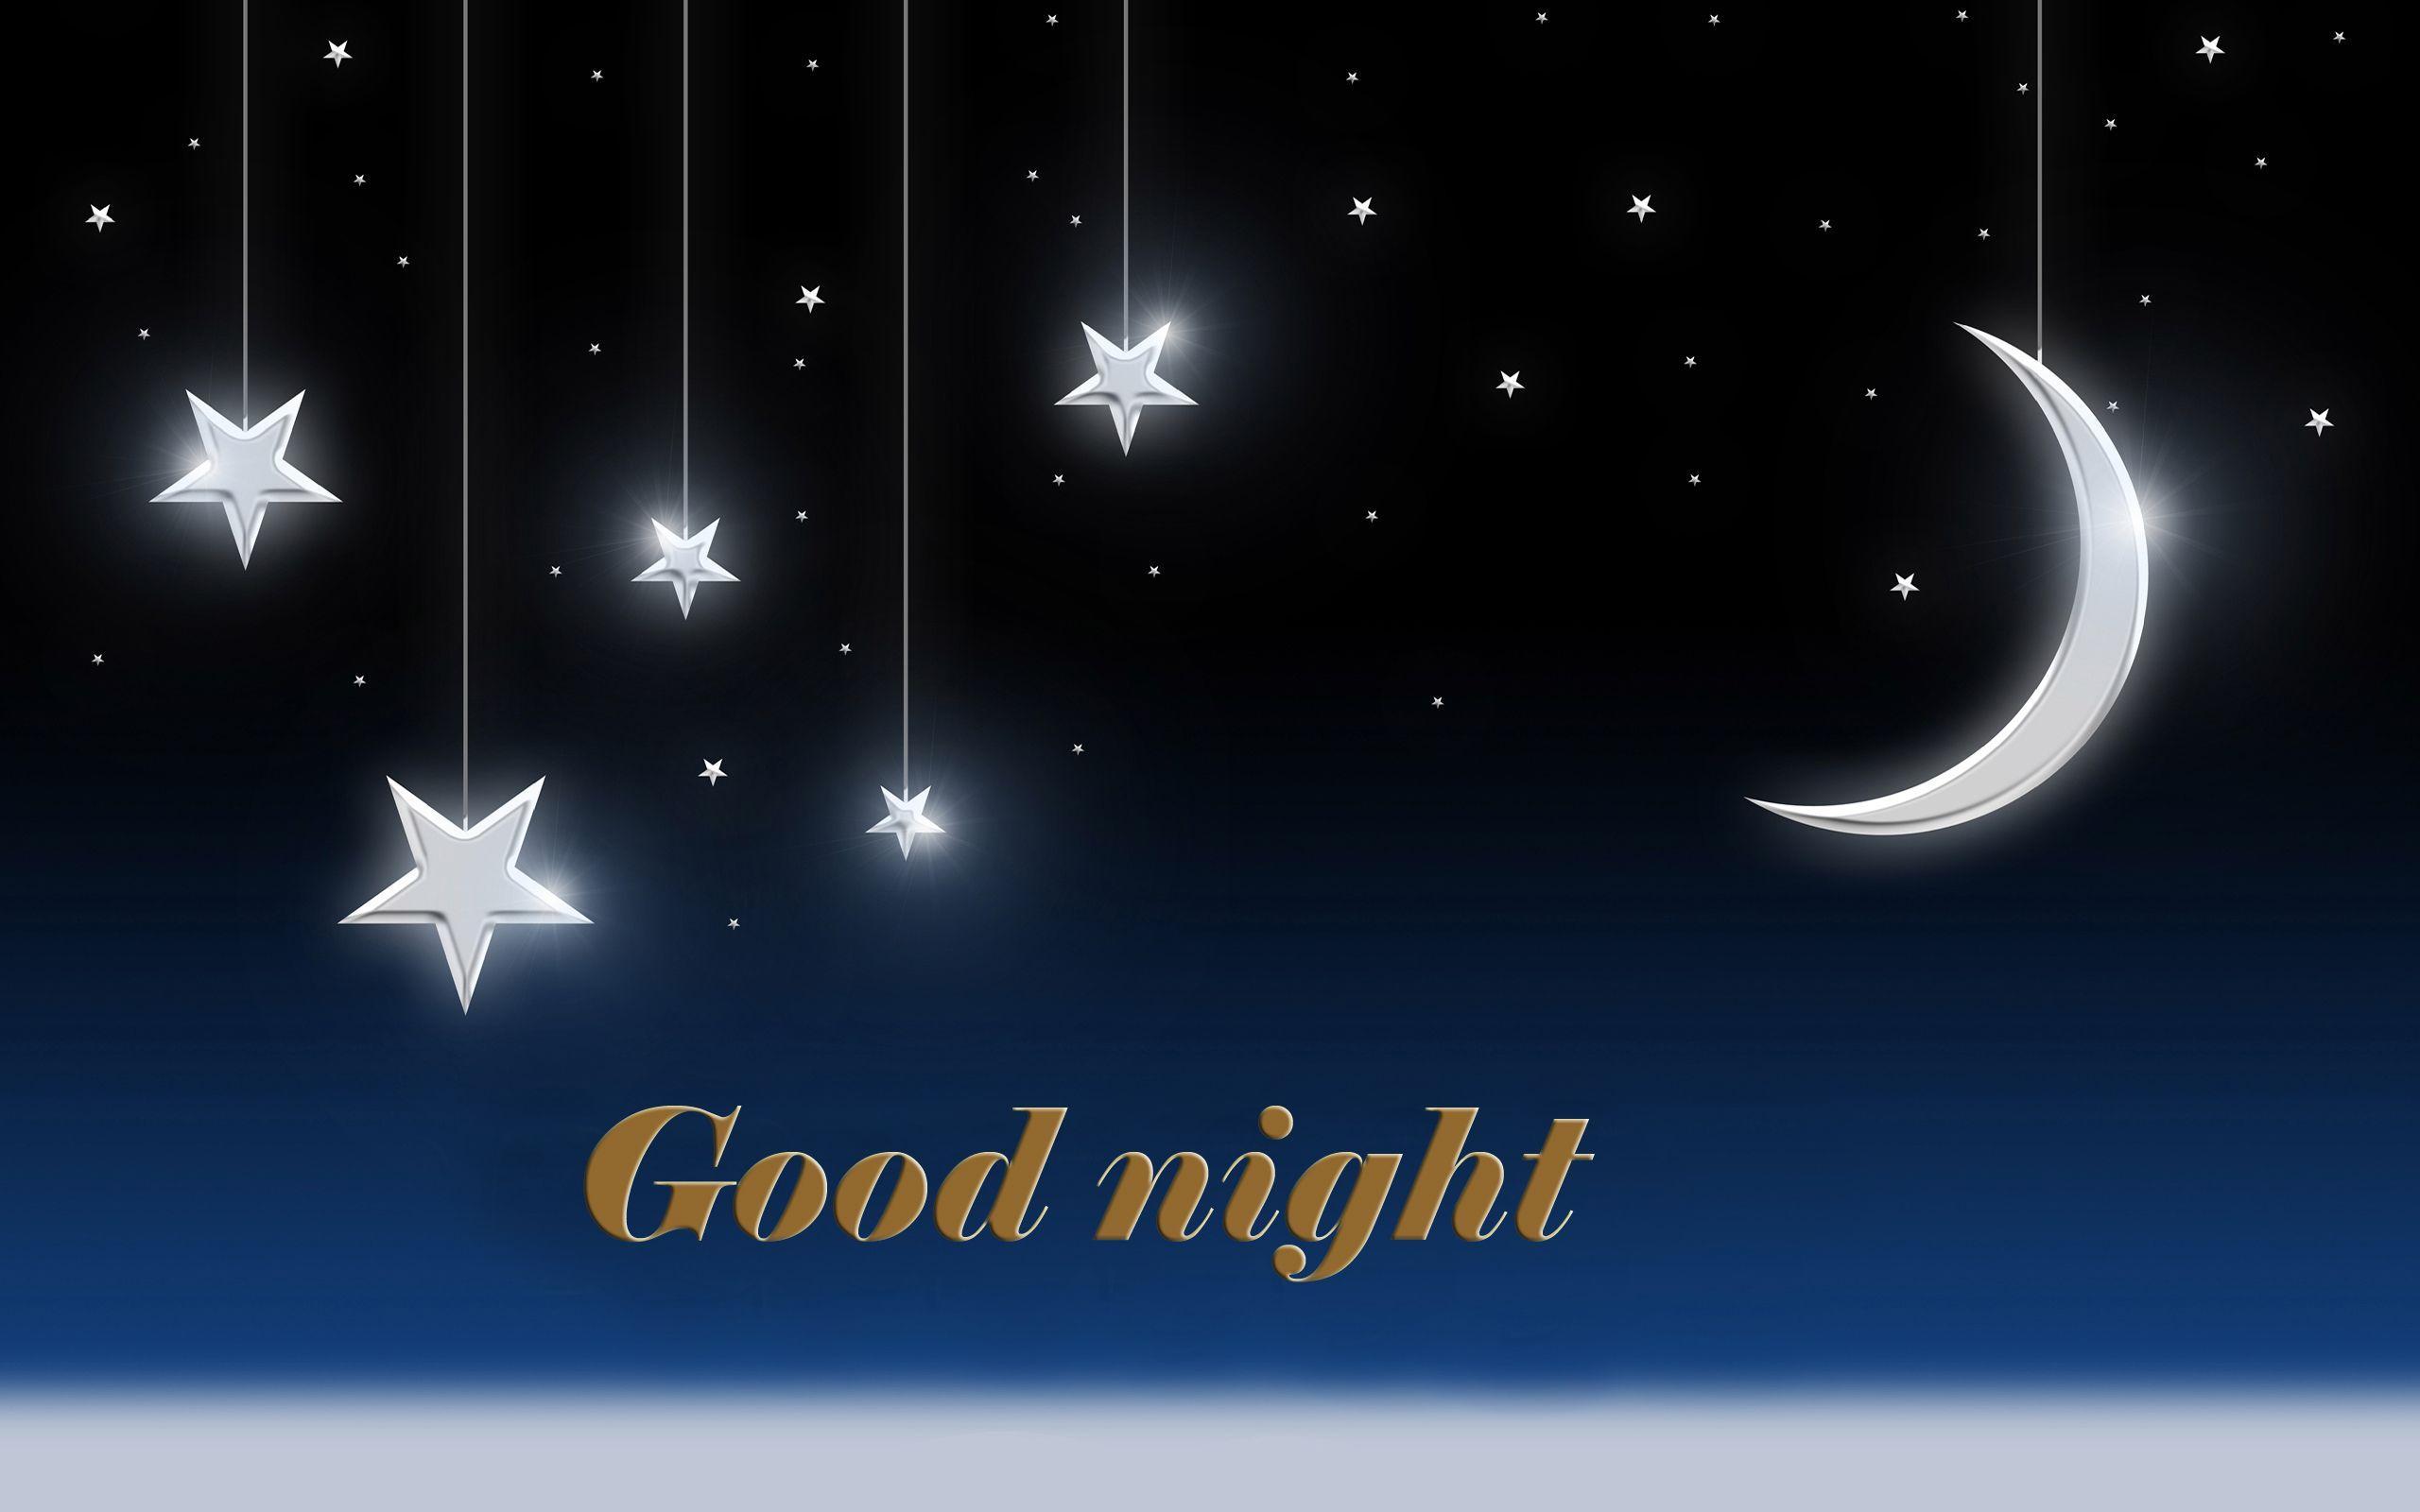 Free Good Night Wallpaper For iPhone